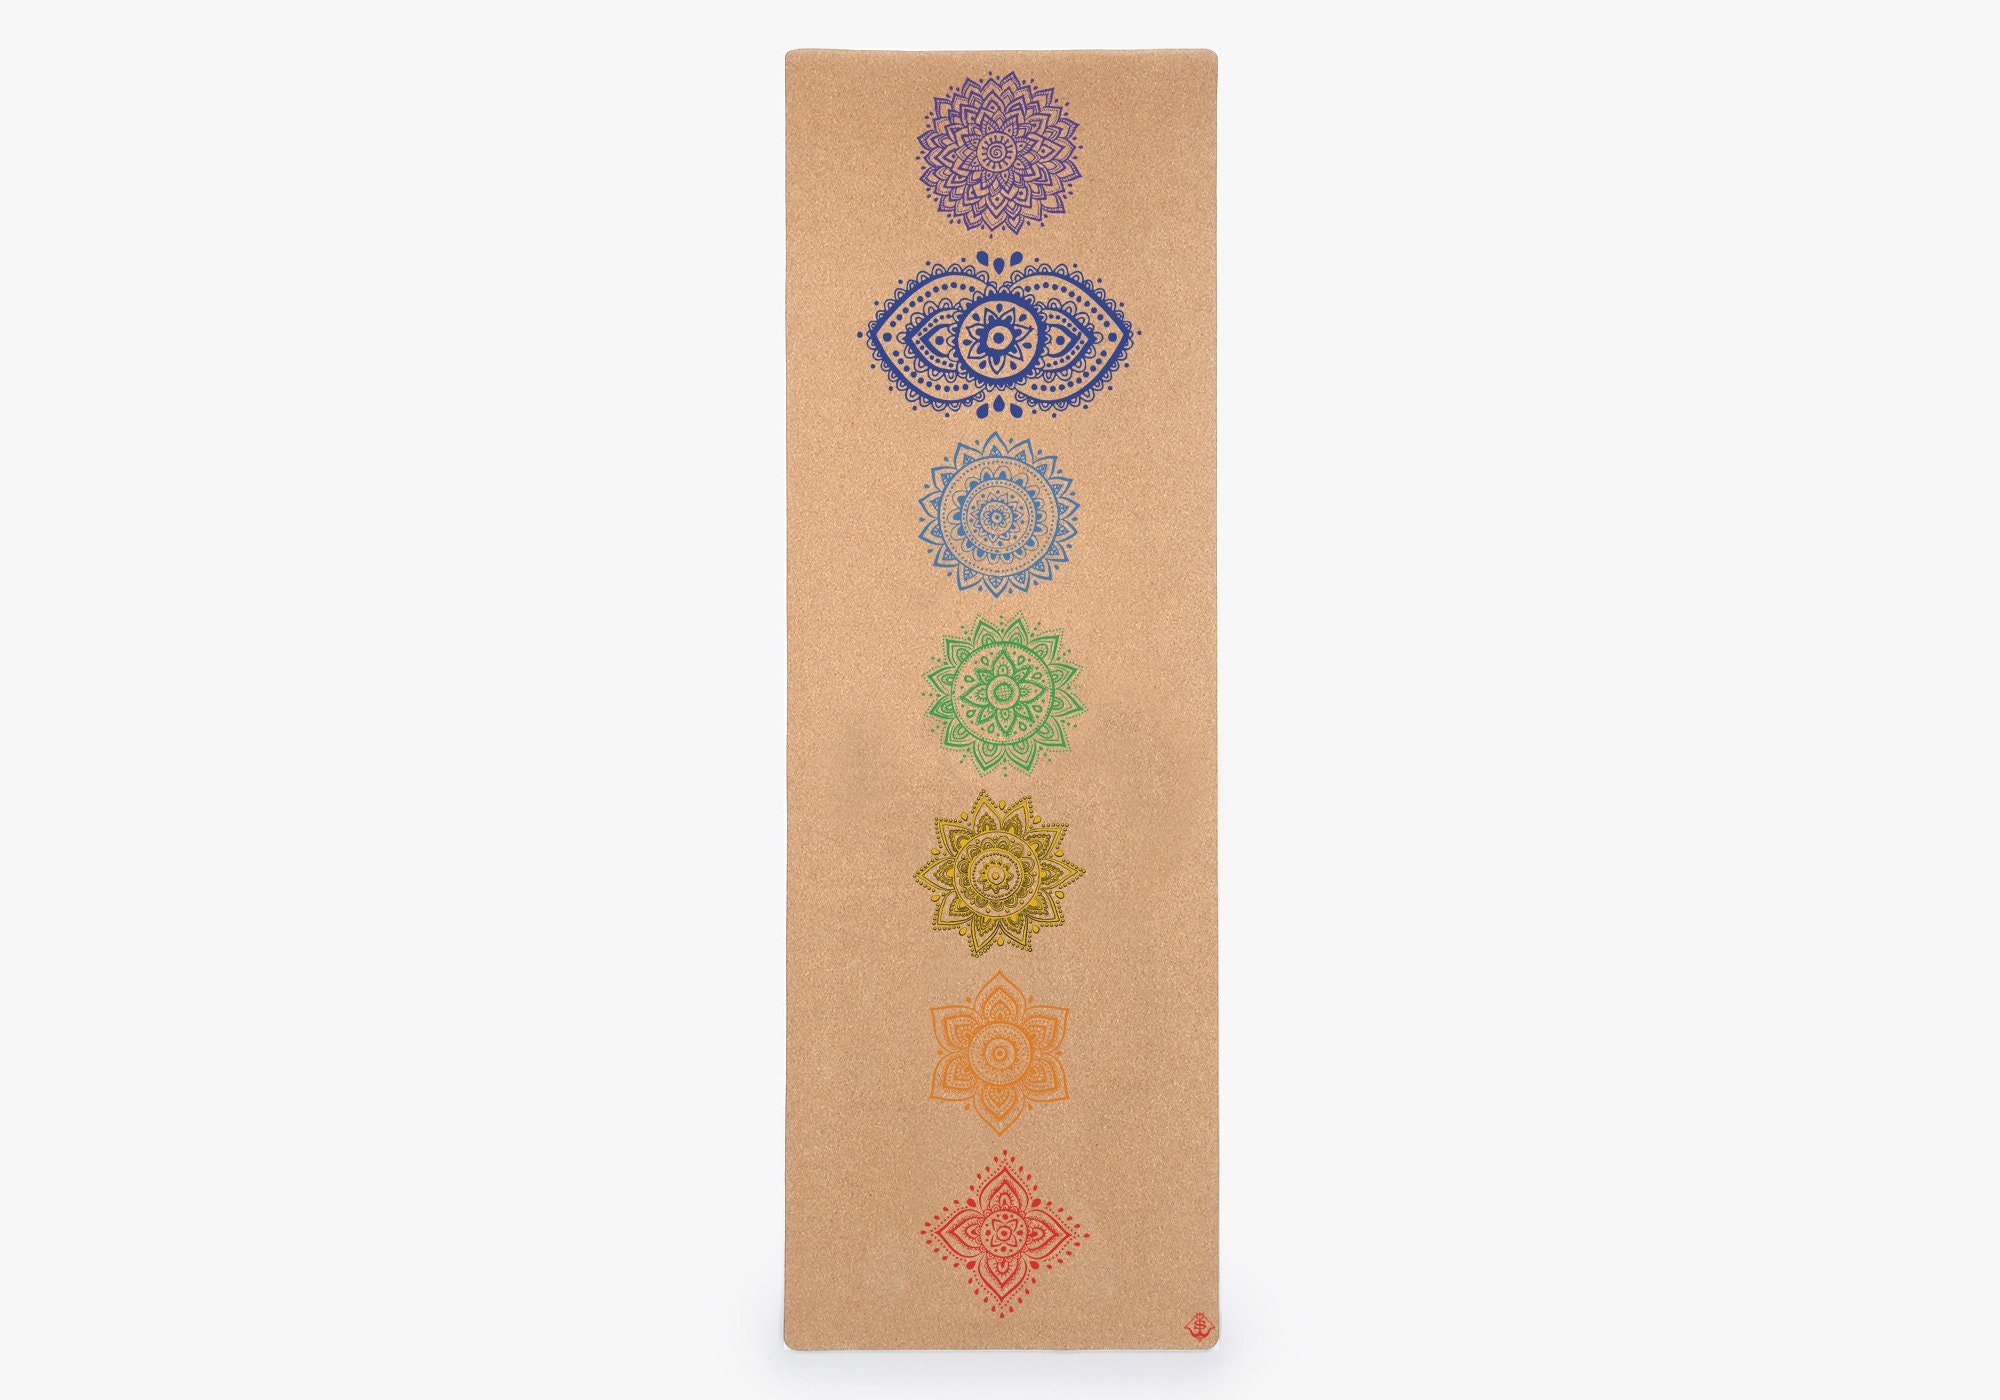 Abstract Modern Organic Shapes Floral Pattern Extra Thick Yoga Mat - Eco  Friendly Non-Slip Exercise & Fitness Mat Workout Mat for All Type of Yoga